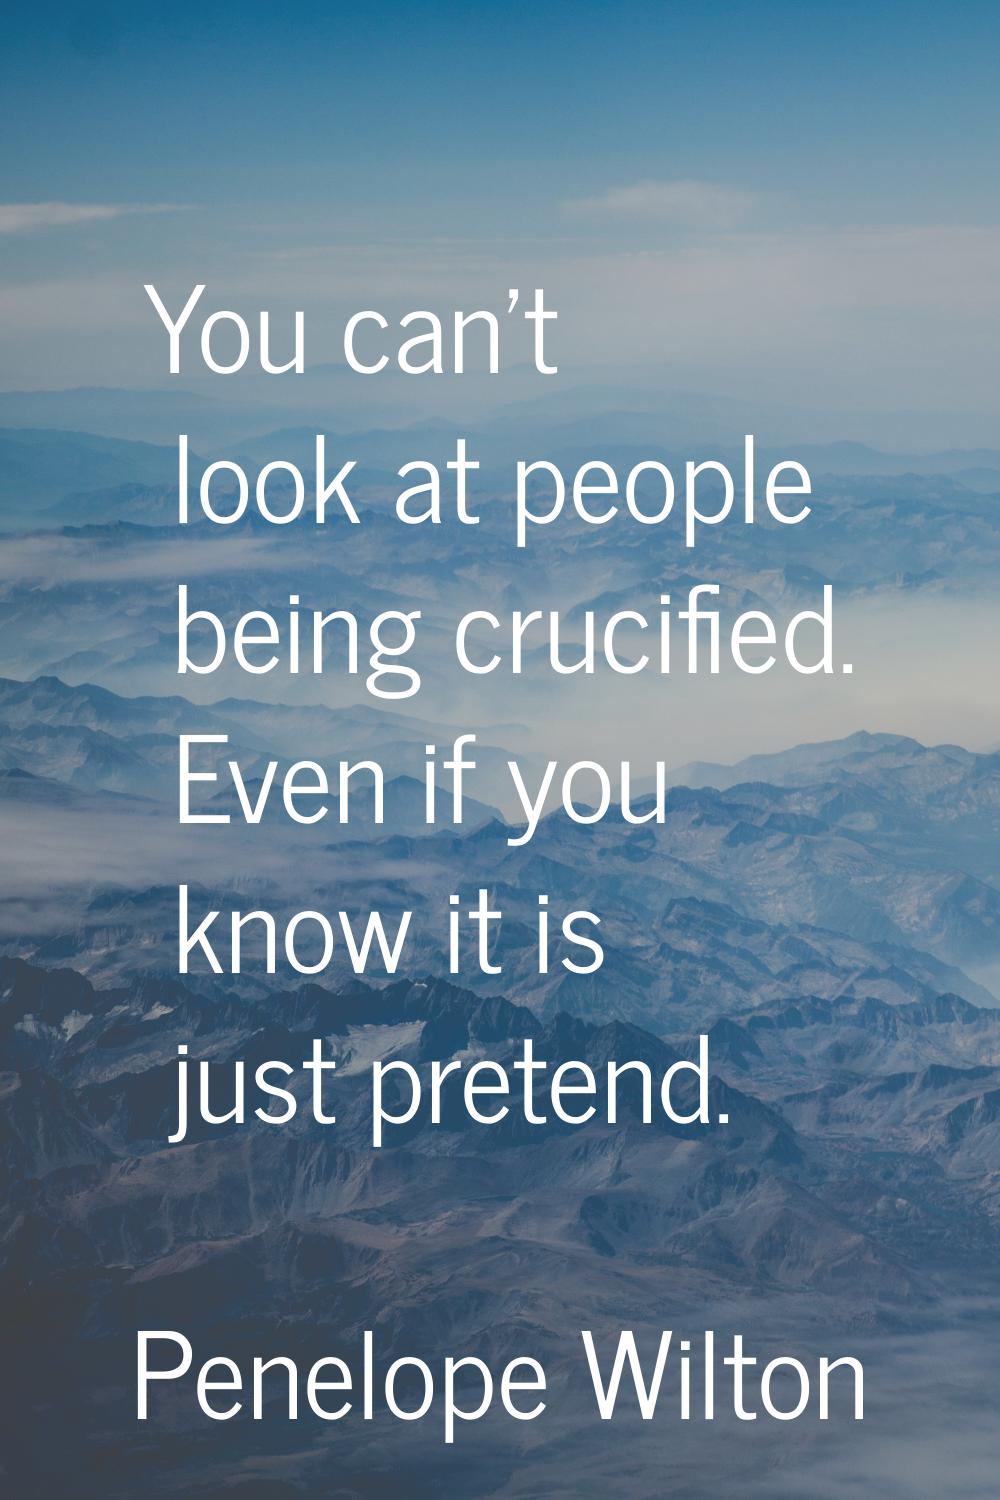 You can't look at people being crucified. Even if you know it is just pretend.